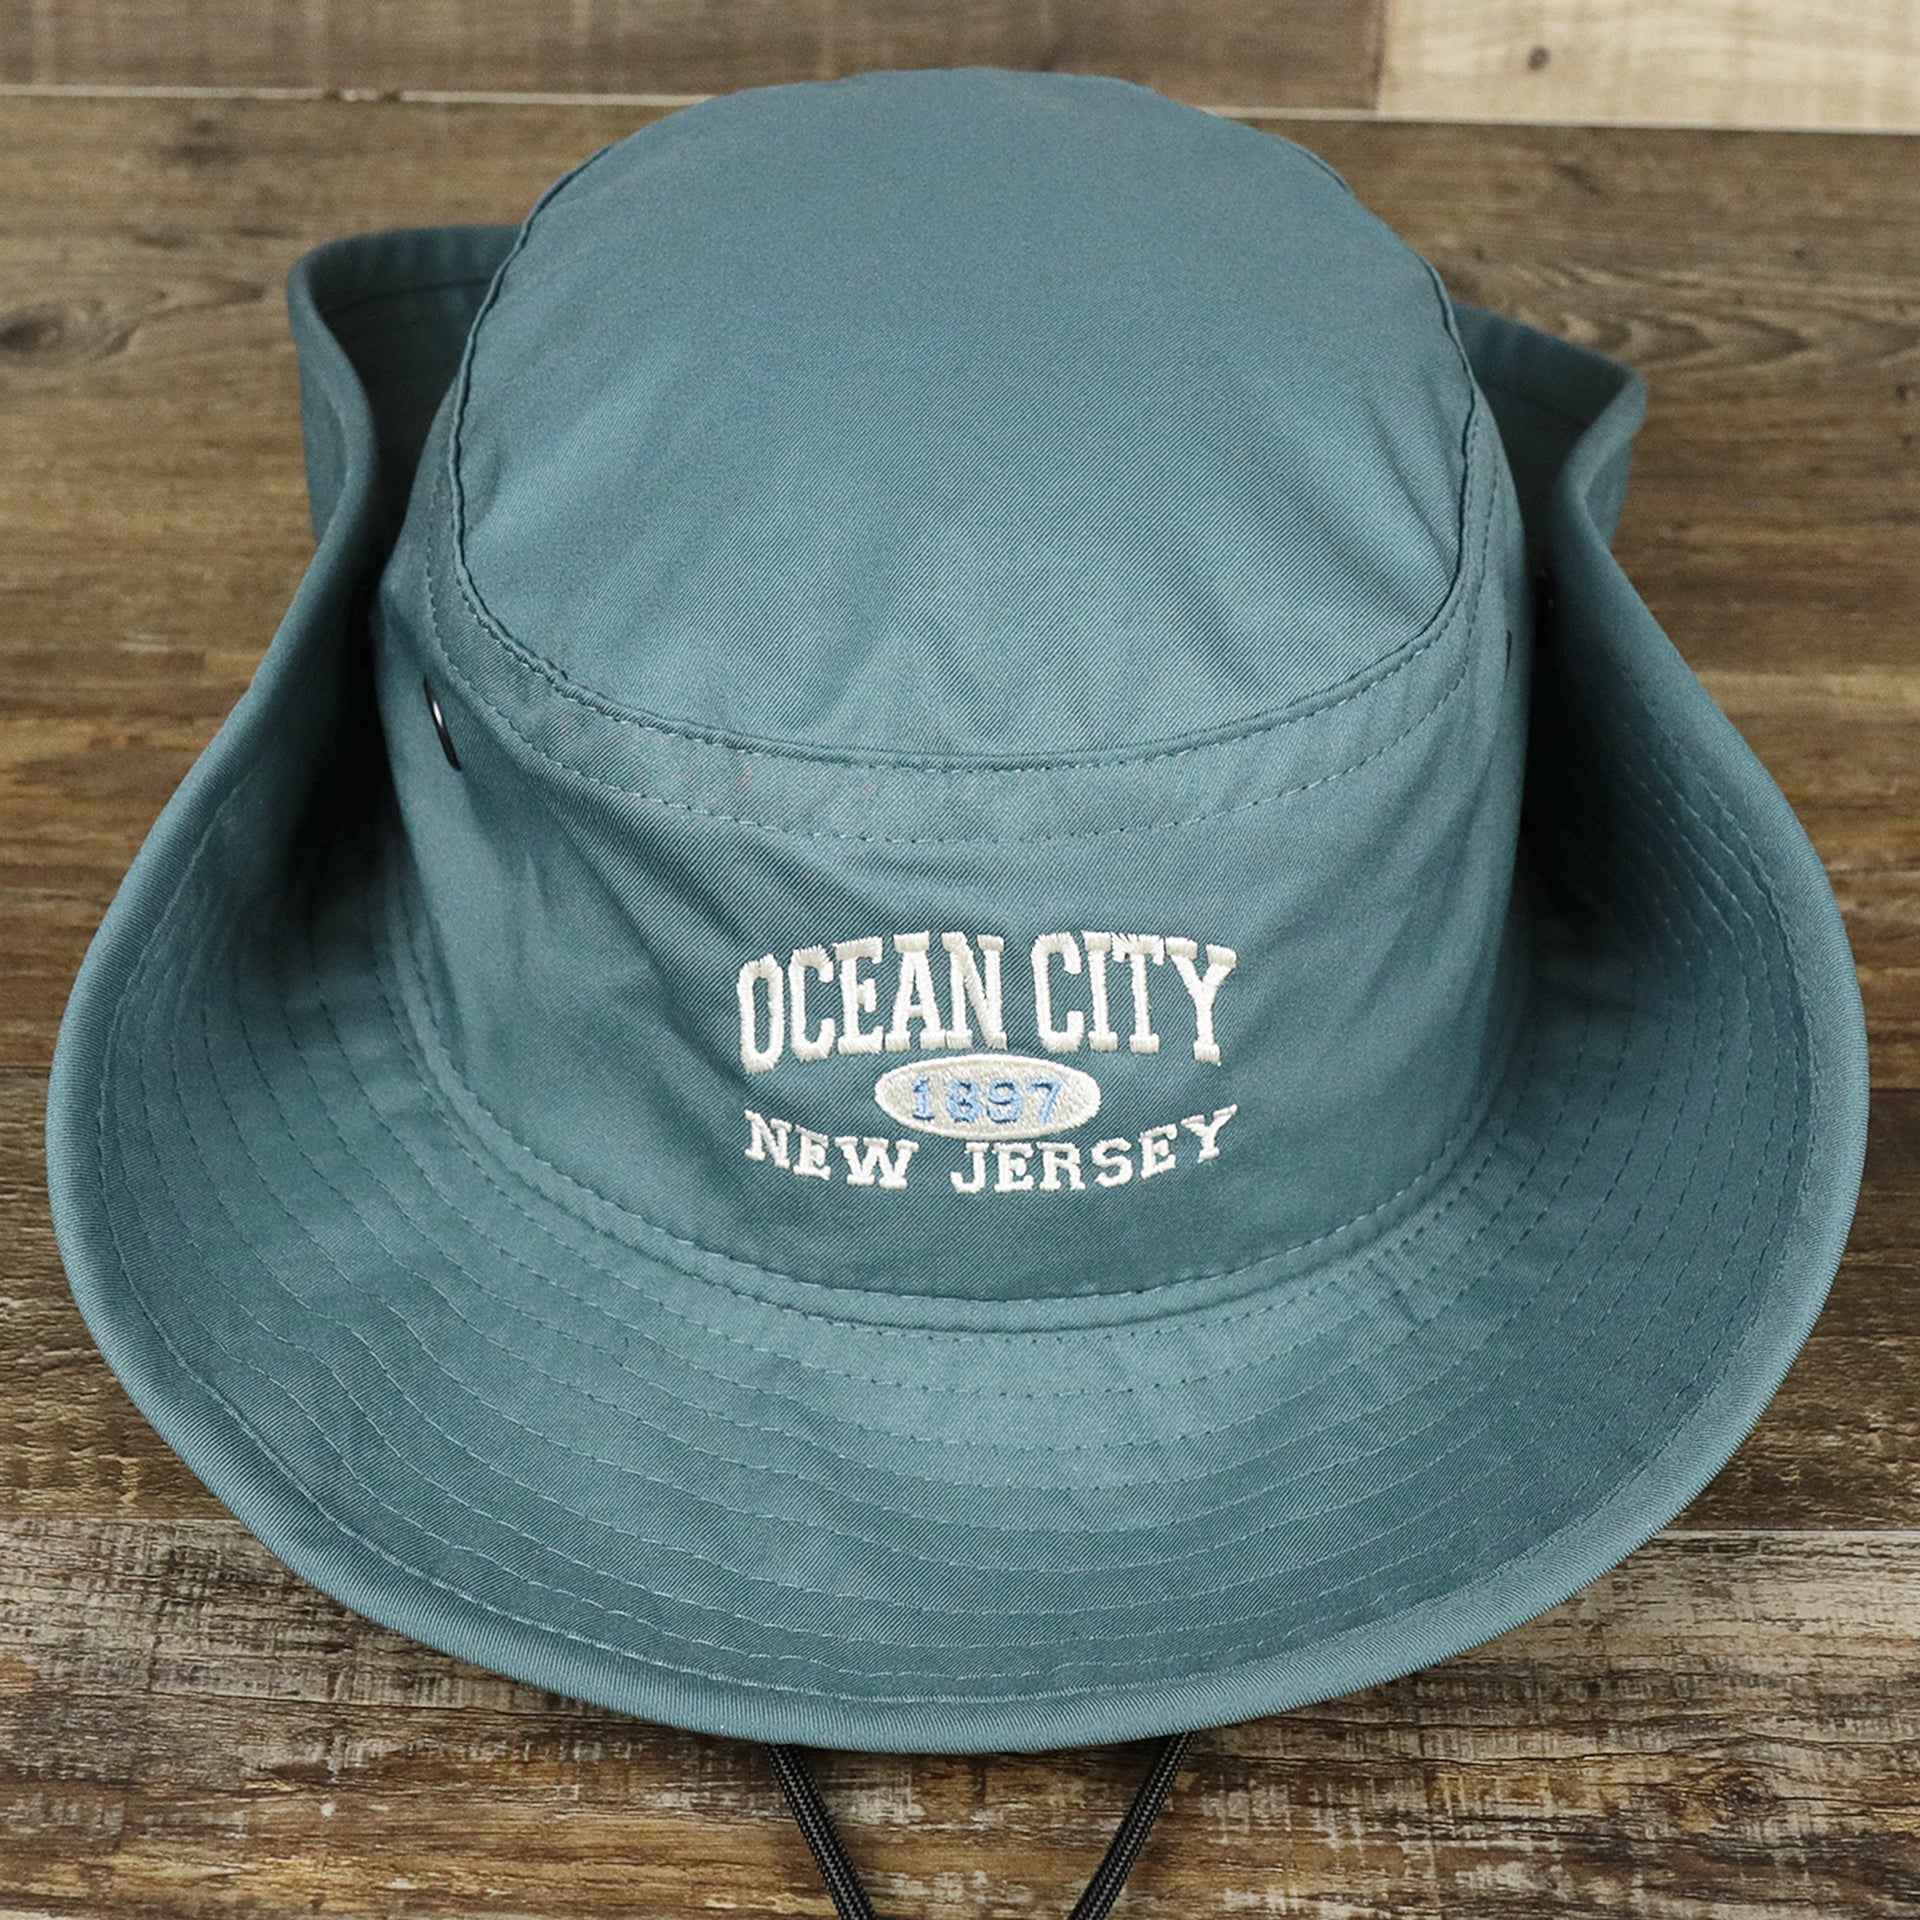 The Ocean City New Jersey 1897 Bucket Hat | Blue Steel Bucket Hat with the sides pinned up